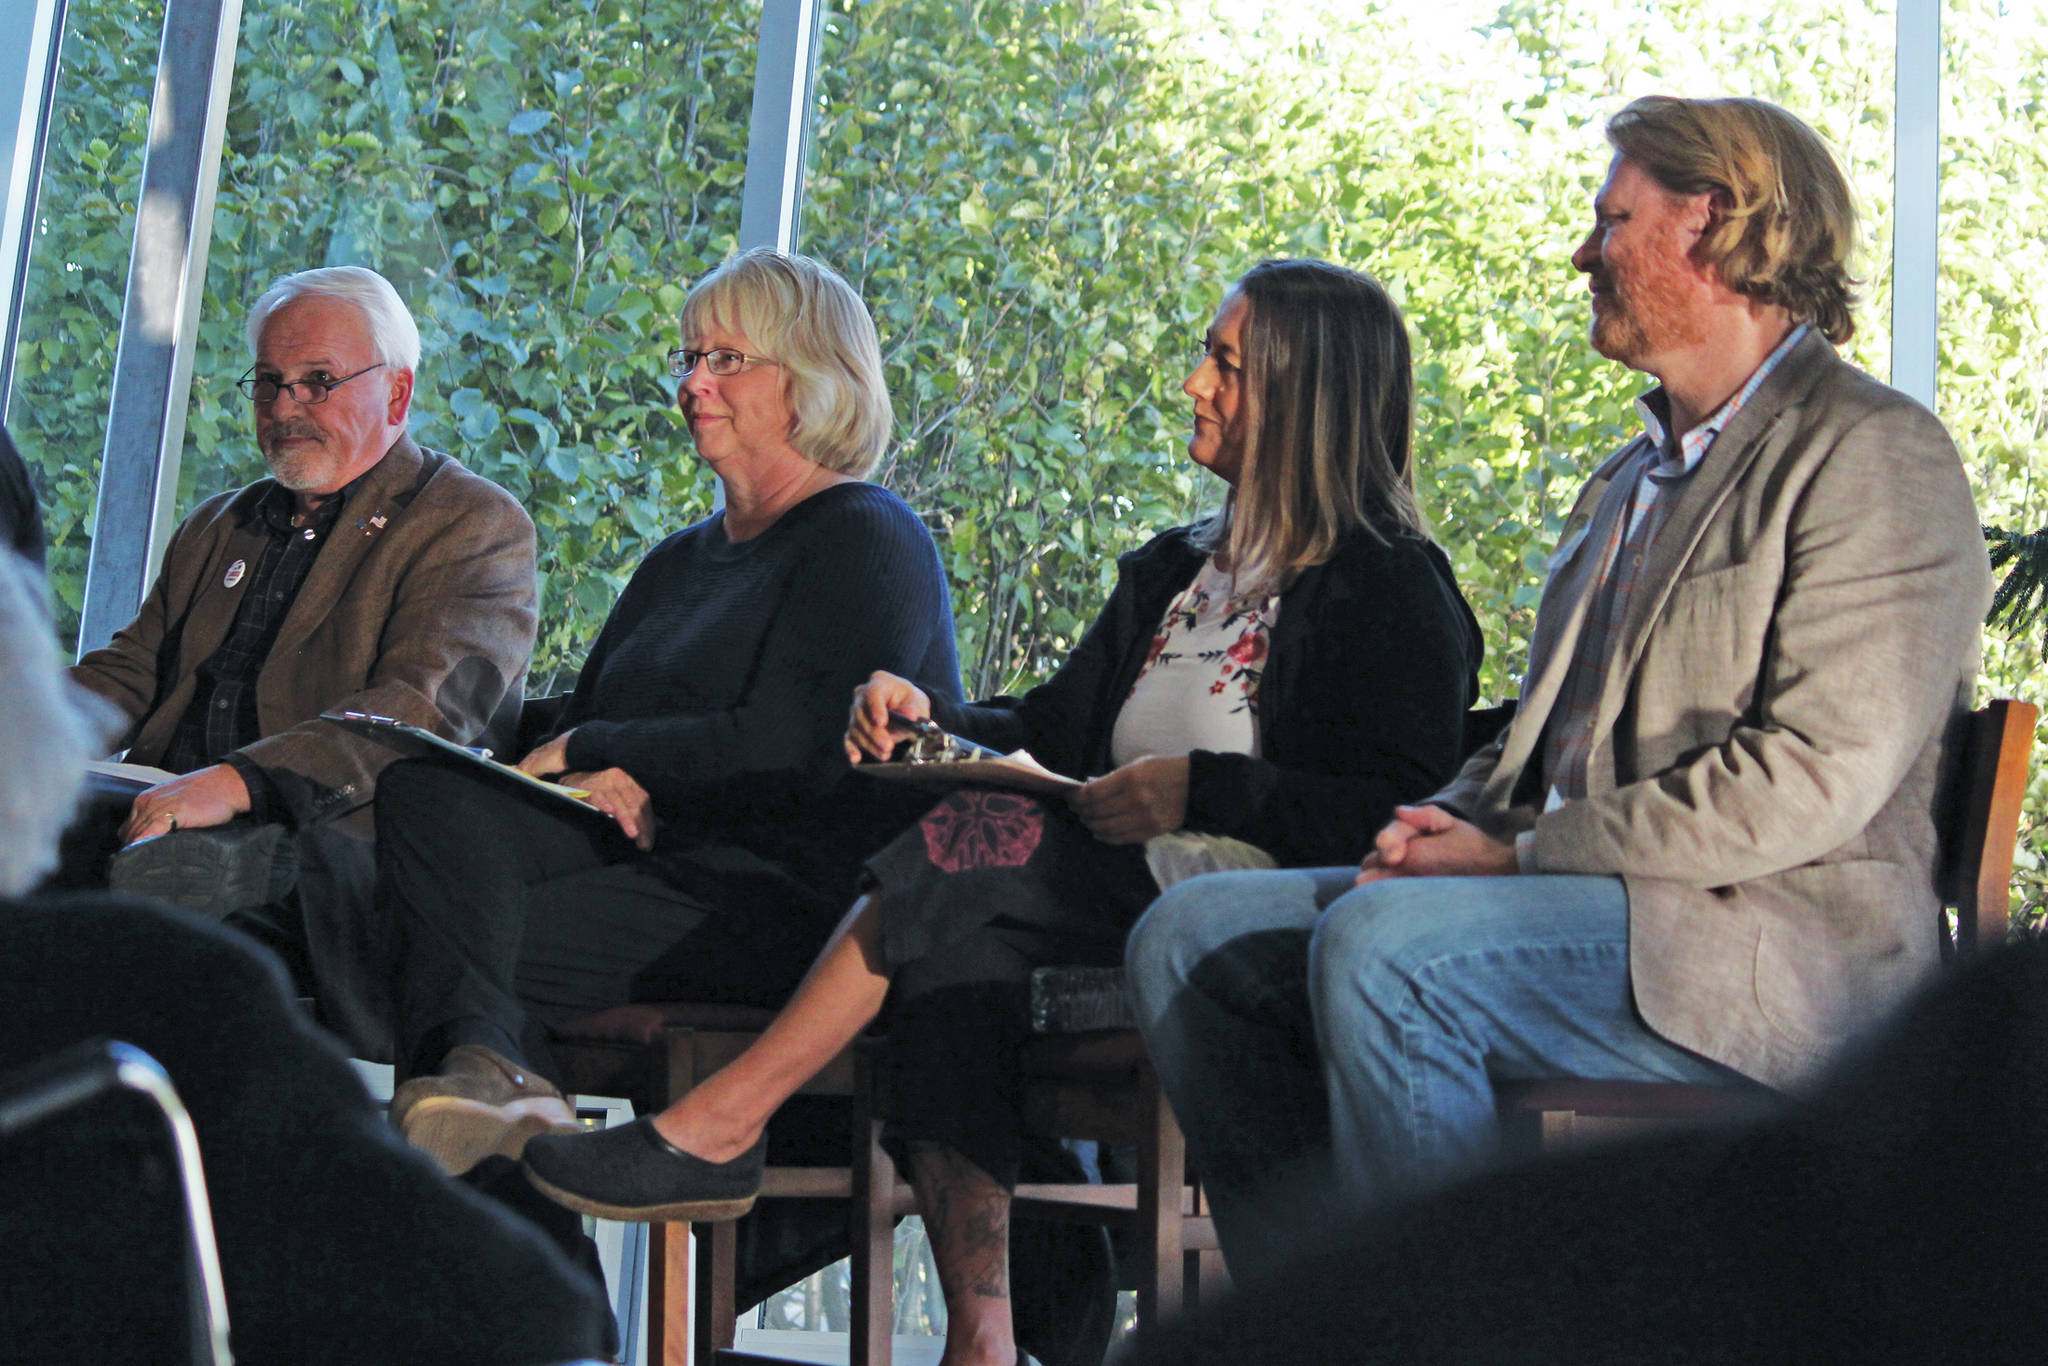 From left to right: Candidates for Homer City Council Tom Stroozas, Shelly Erickson, Storm Hansen-Cavasos and Joey Evensen participate in a candidate forum Wednesday, Sept. 25, 2019 at the Homer Public Library in Homer, Alaska. (Photo by Megan Pacer/Homer News)